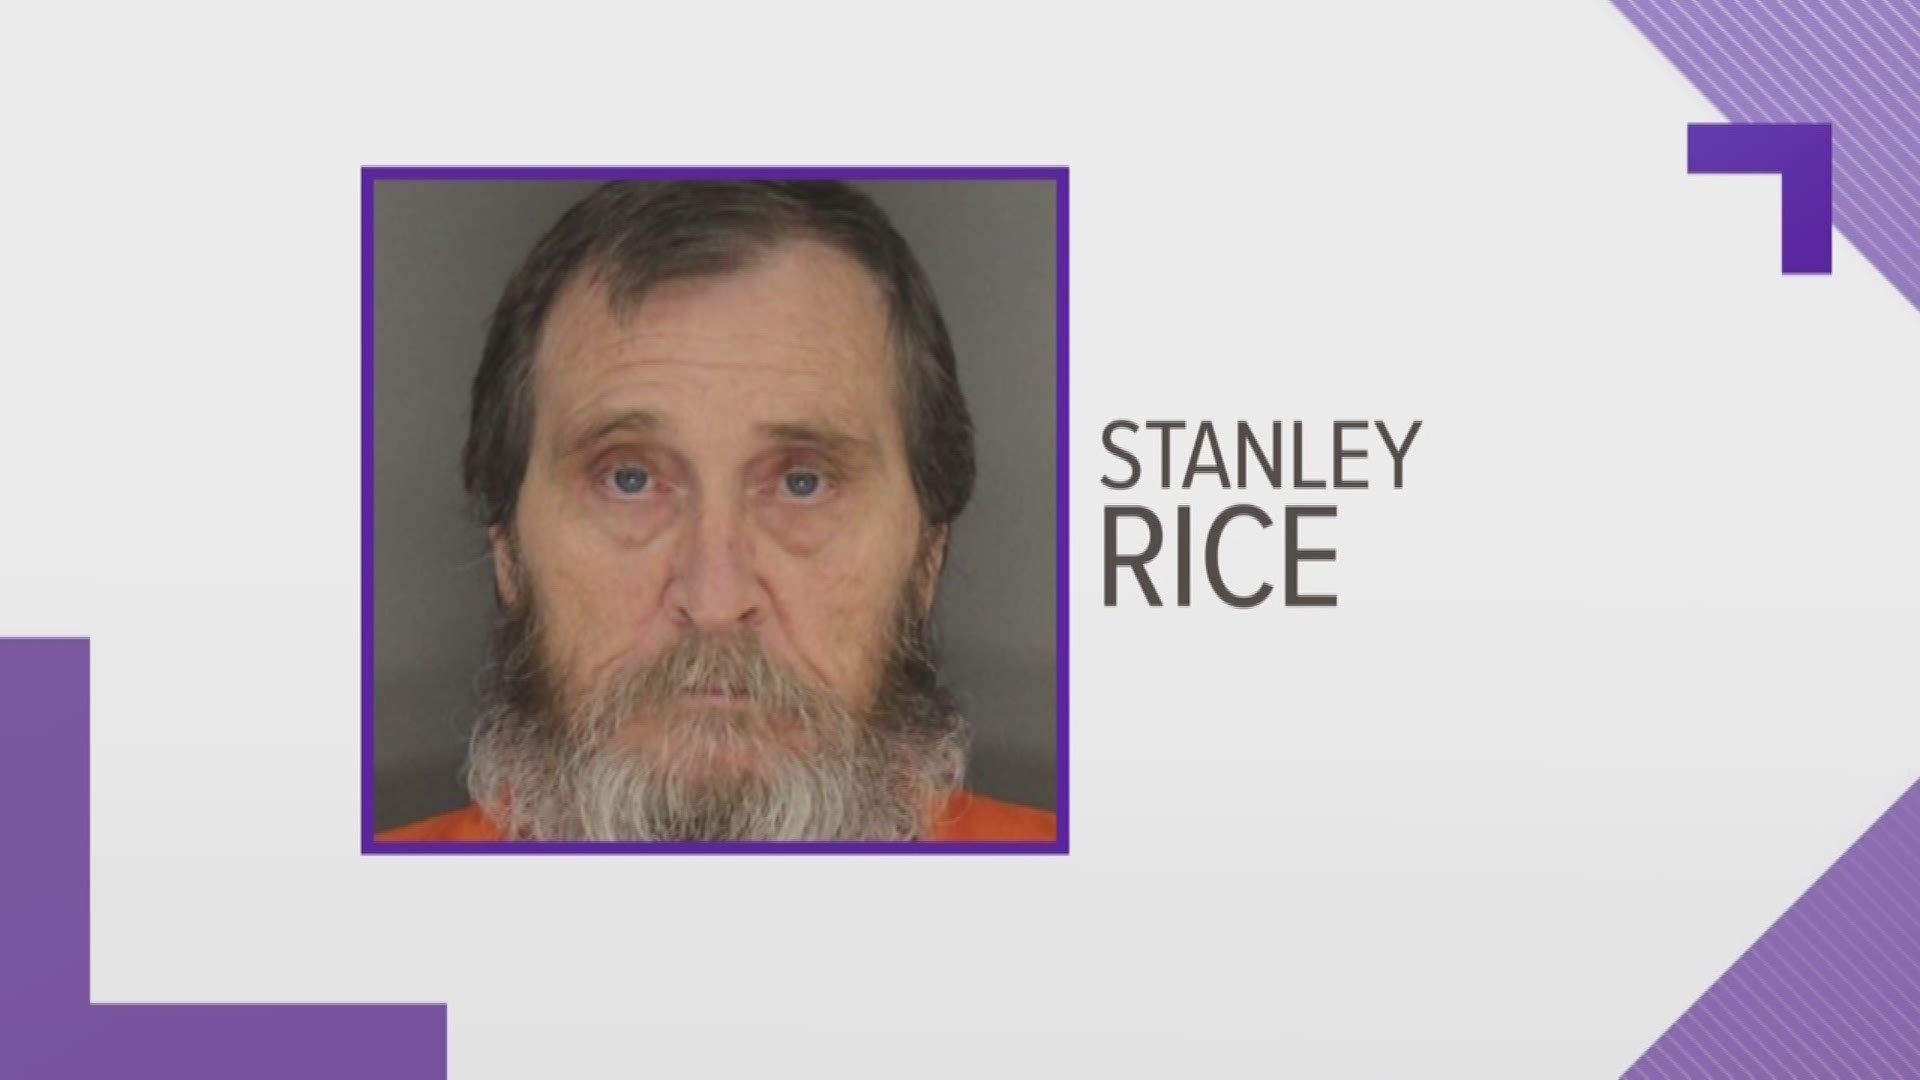 A Van Buren man gets life in prison for sexually abusing two minors.